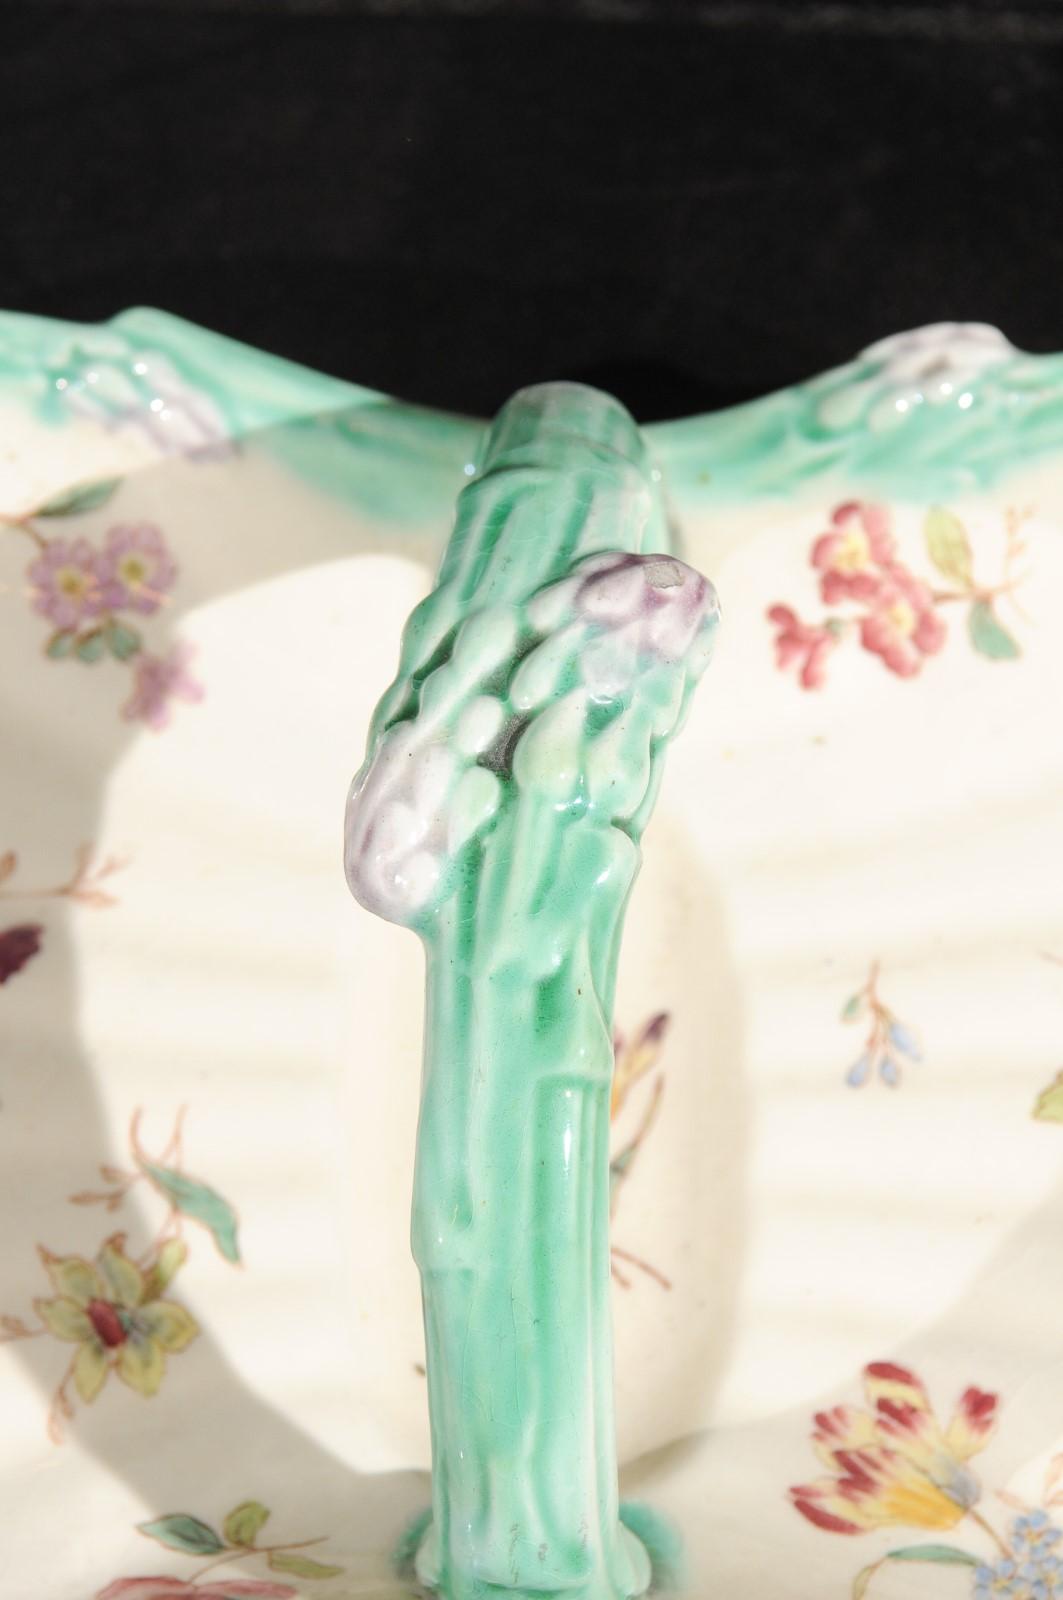 French 19th Century Longchamp Majolica Asparagus Server with Floral Decor For Sale 2